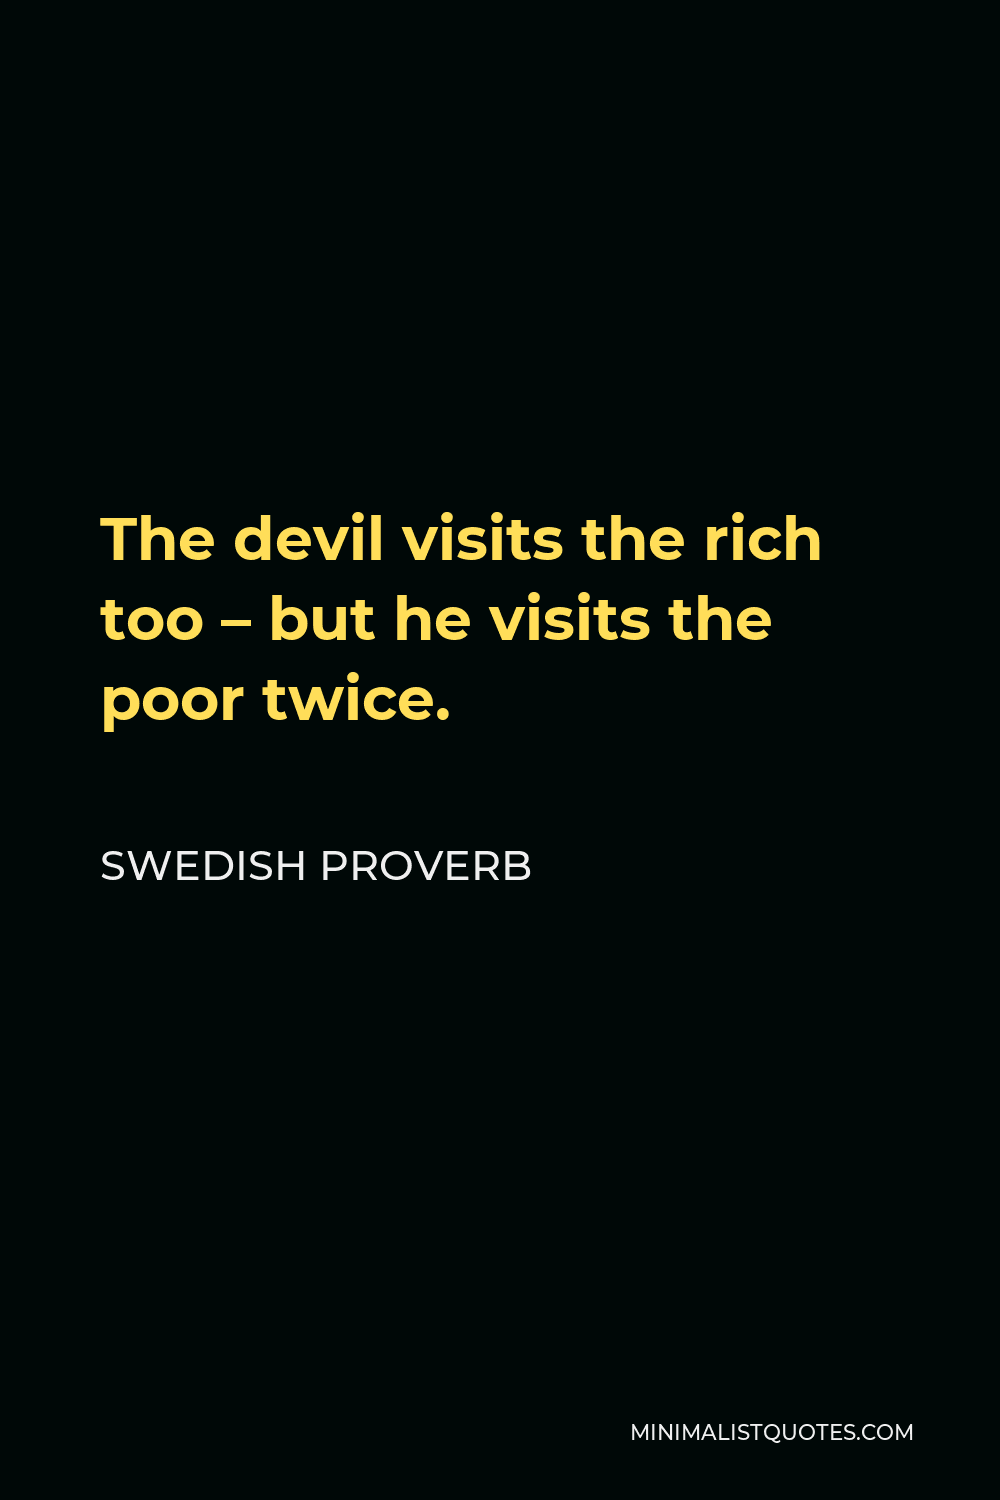 Swedish Proverb Quote - The devil visits the rich too – but he visits the poor twice.